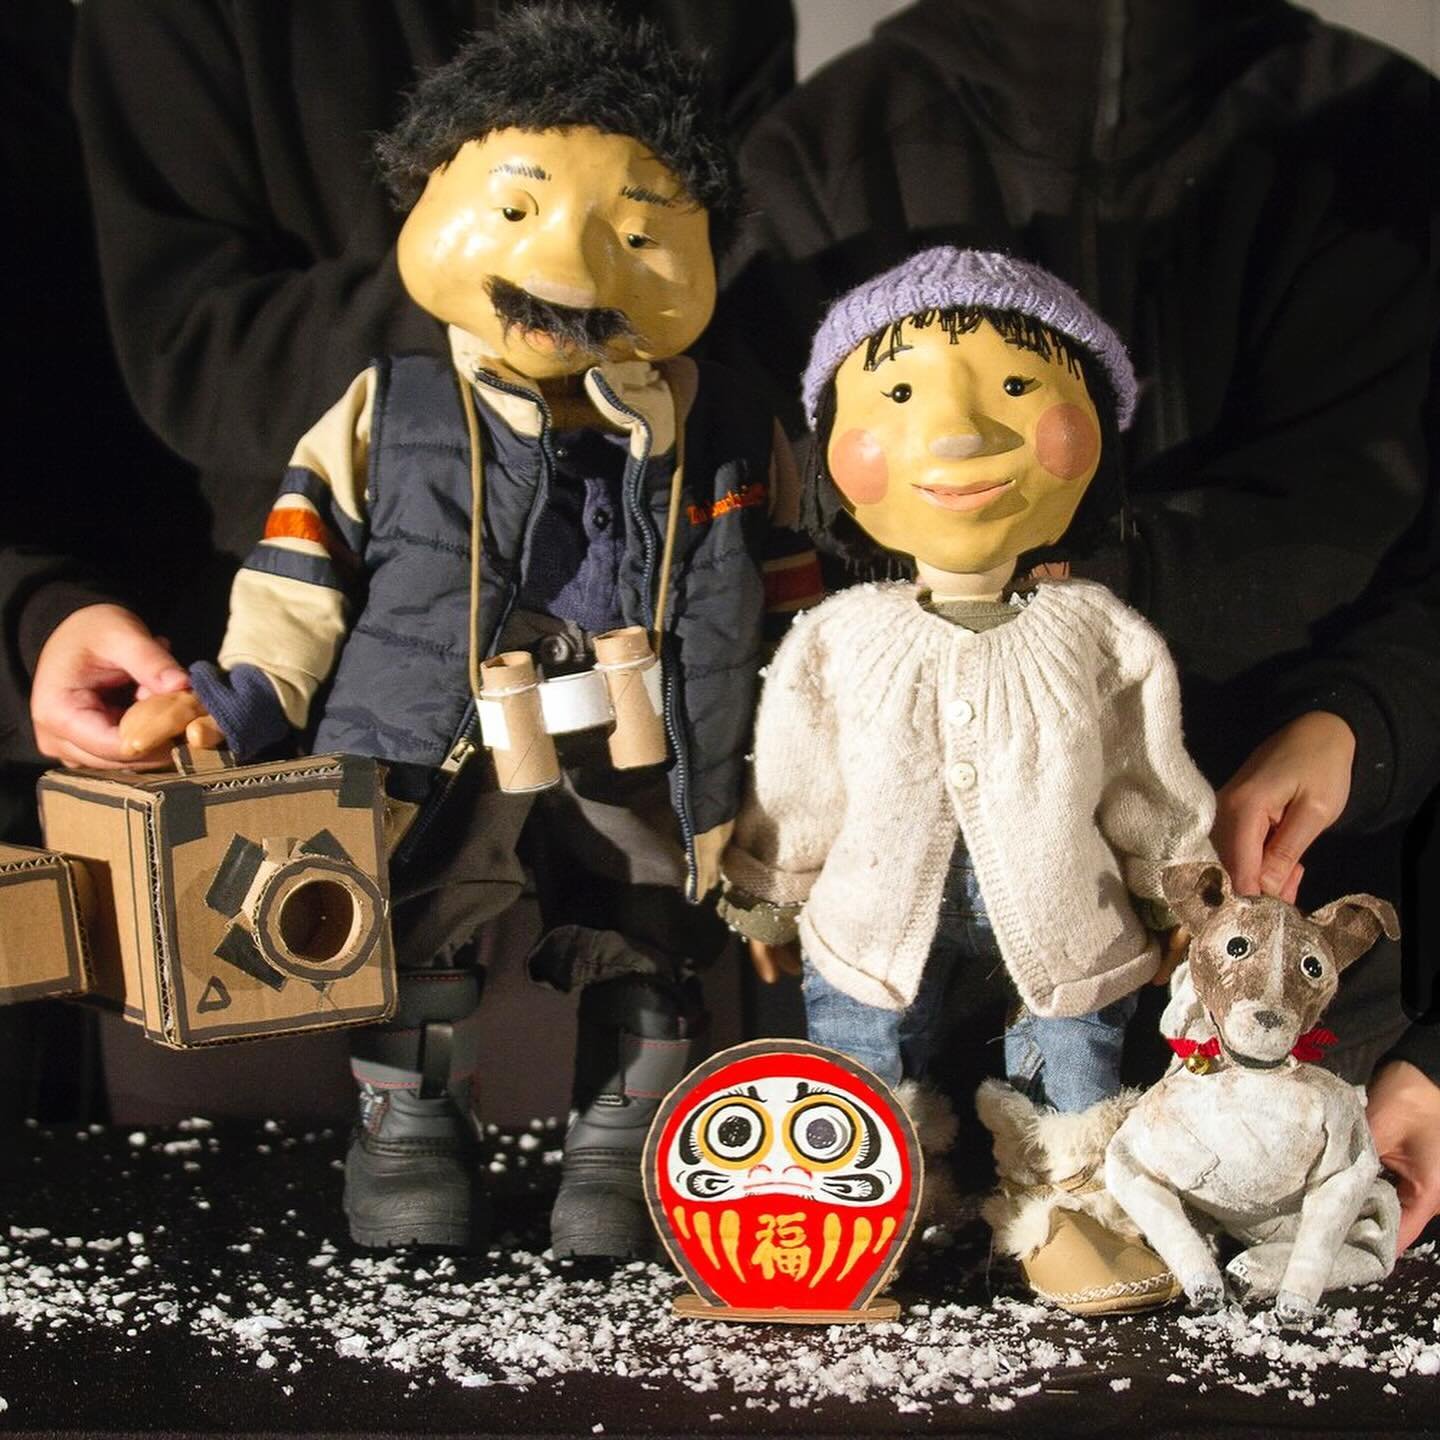 With Otosan, Shizuka Kai draws on personal story of wildlife-videographer father with artful puppets

The designer has spent five years building the Vancouver International Children&rsquo;s Festival show with @littleonionpuppet. 

Head to Stir for mo